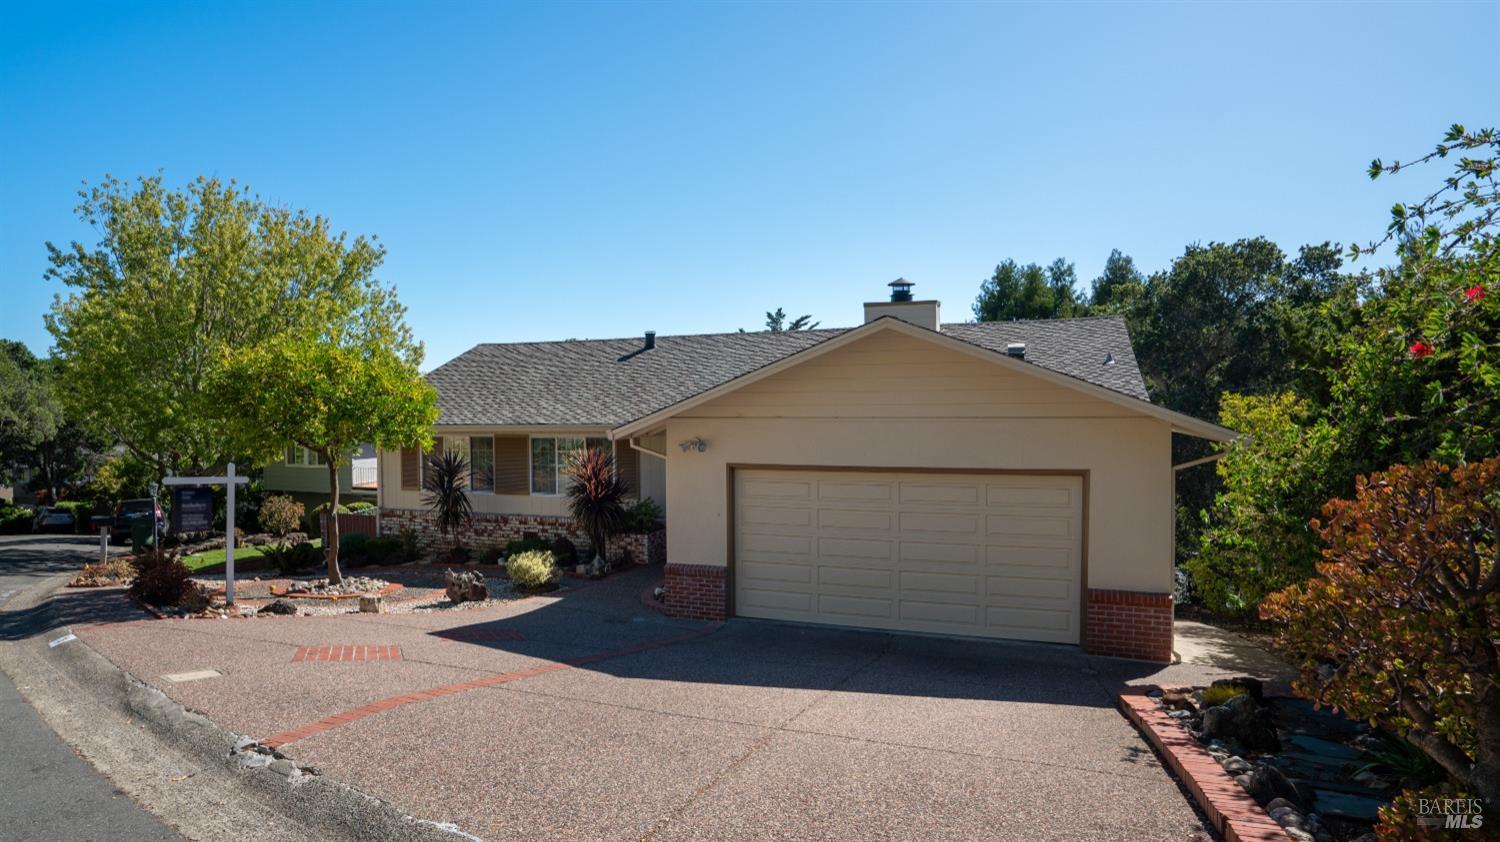 This Greenbrae gem has four bedrooms three full baths.  New interior paint, great valley views, and new sewer lateral.  Second kitchen, full bath, and bedroom located on the lower level with private entrance.  Close to Bon Air for shopping, restaurants, and coffee shops.  Excellent schools!